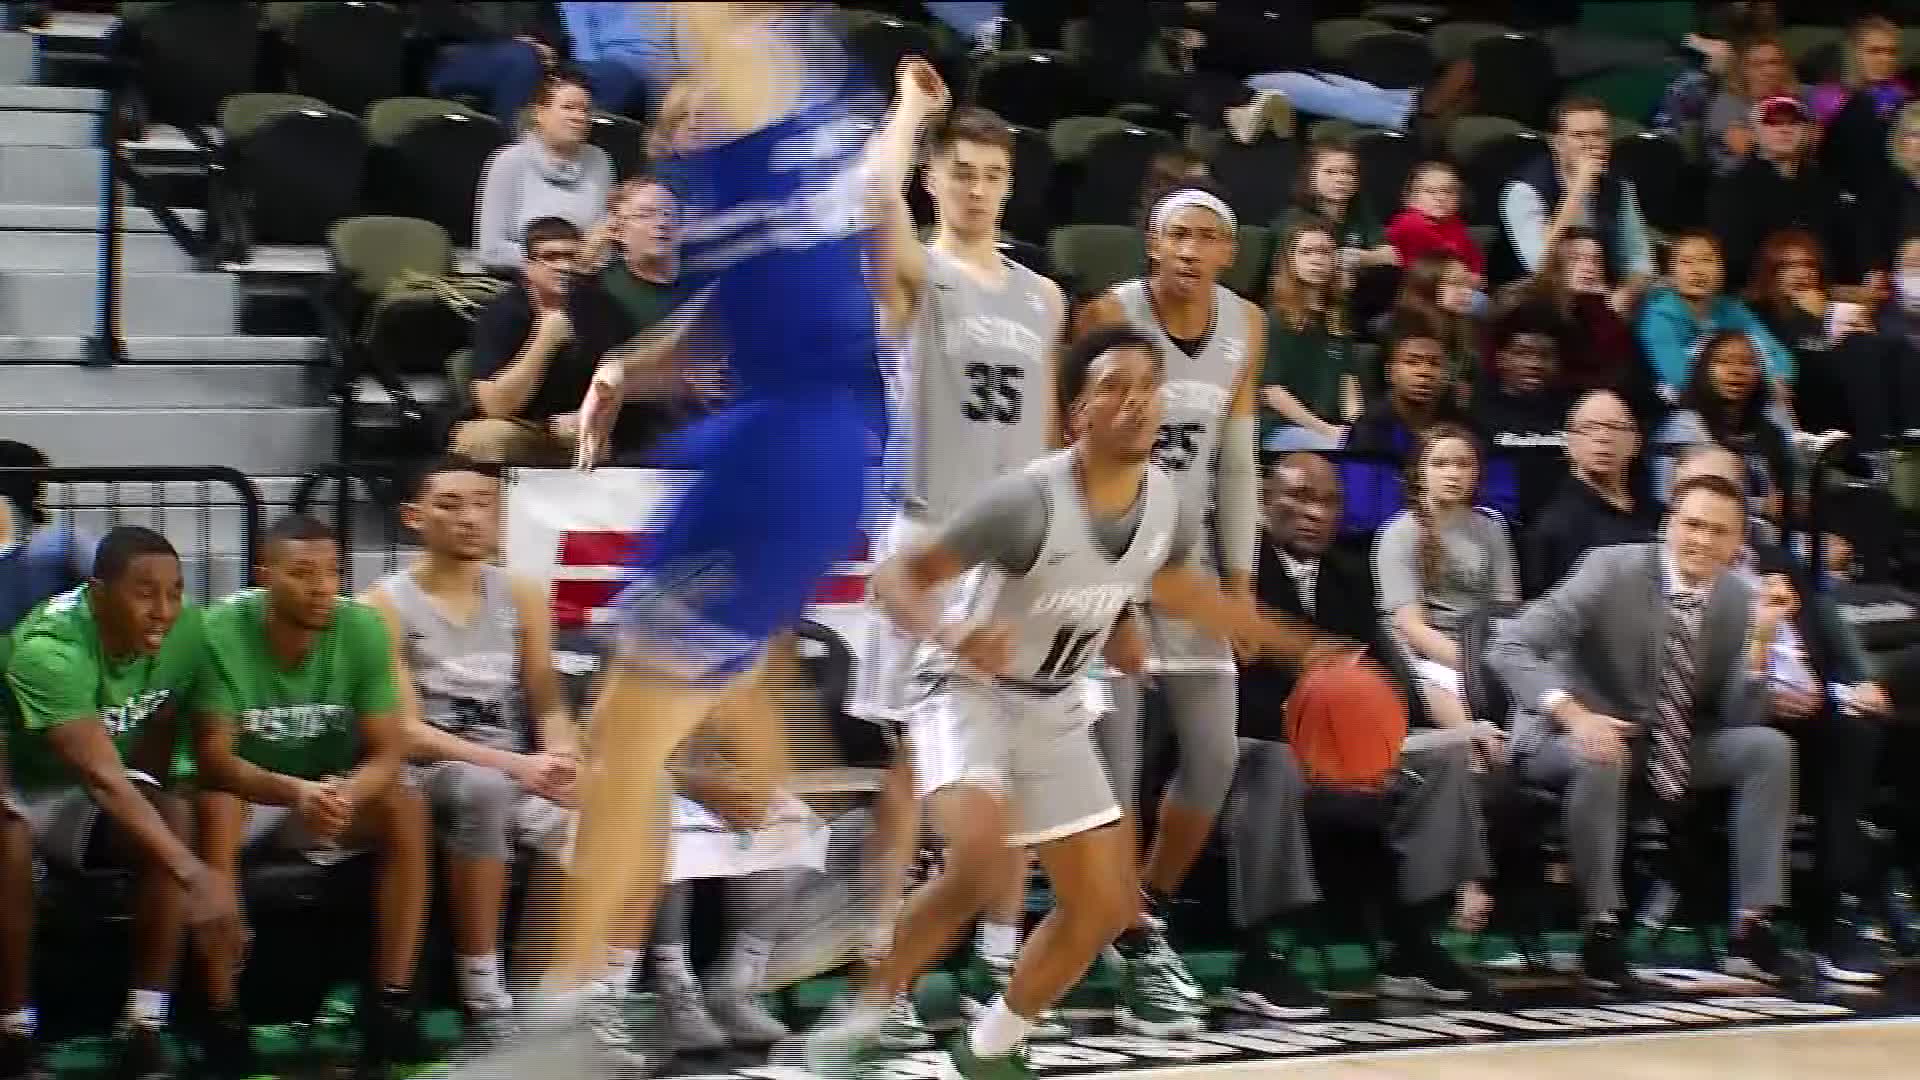 Thumbnail for the video titled "USC Upstate Pulls Away to Beat UNCA, 80-63"